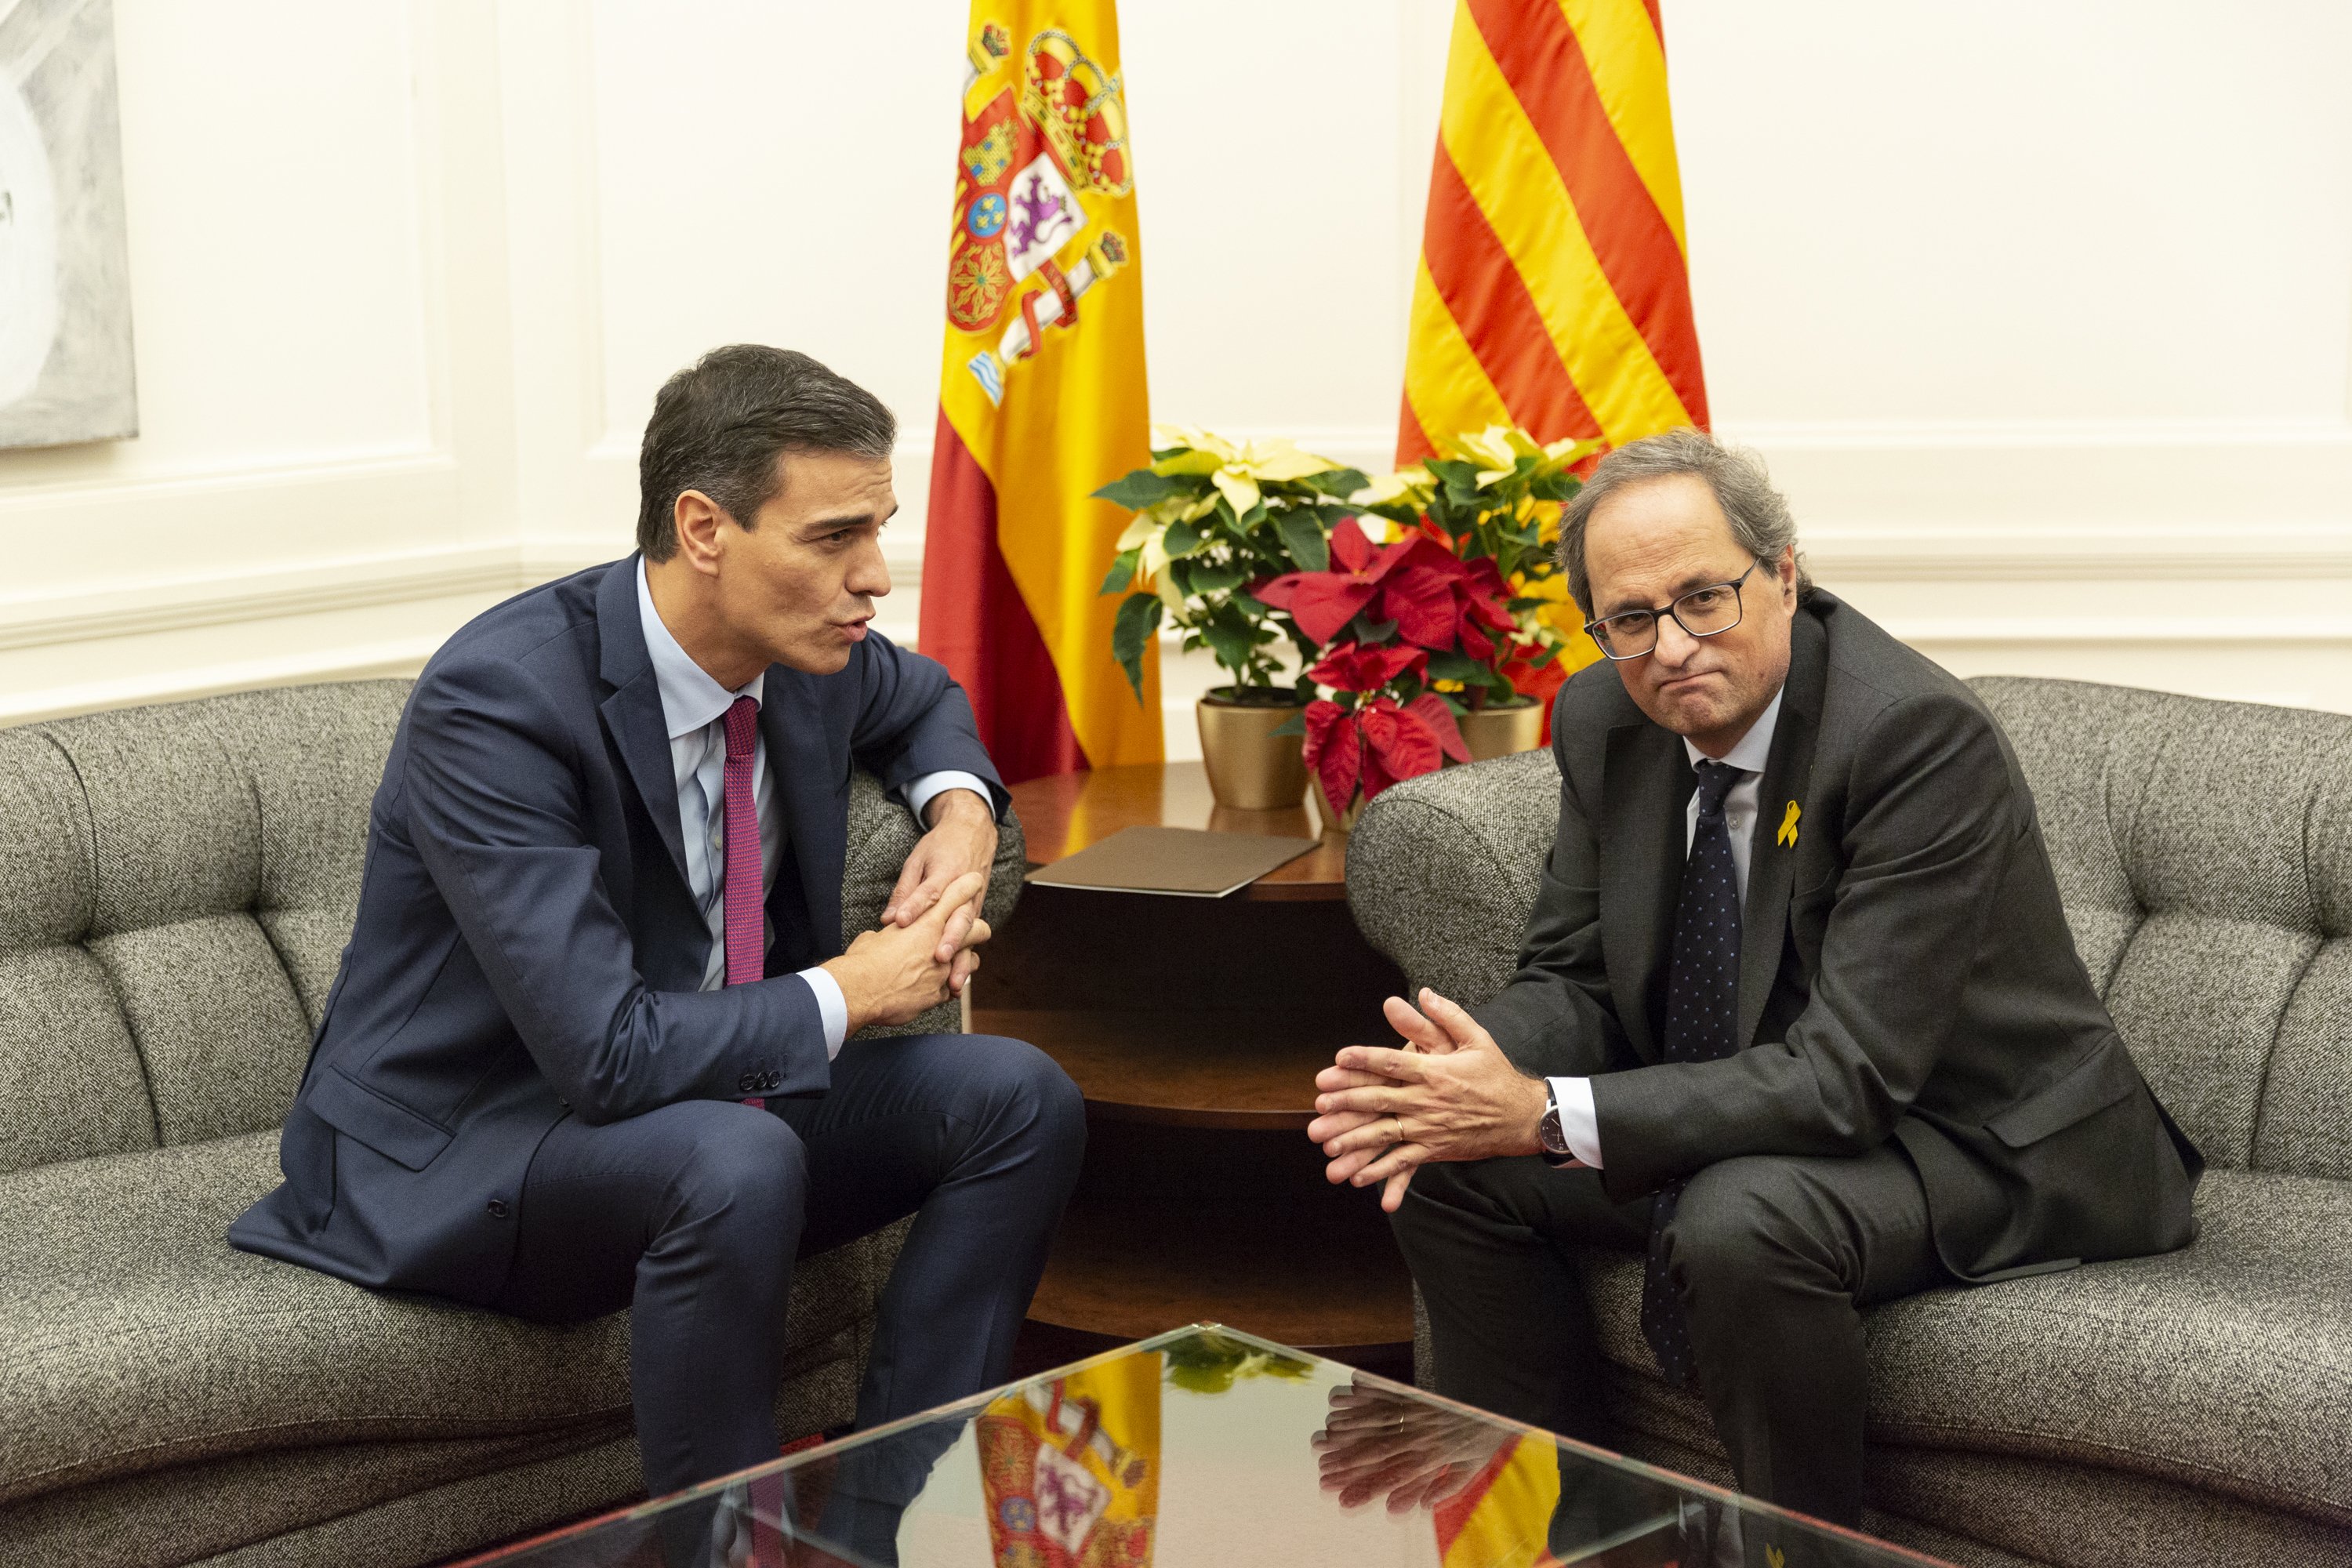 Quim Torra and Pedro Sánchez talk for seven minutes, agree to meet